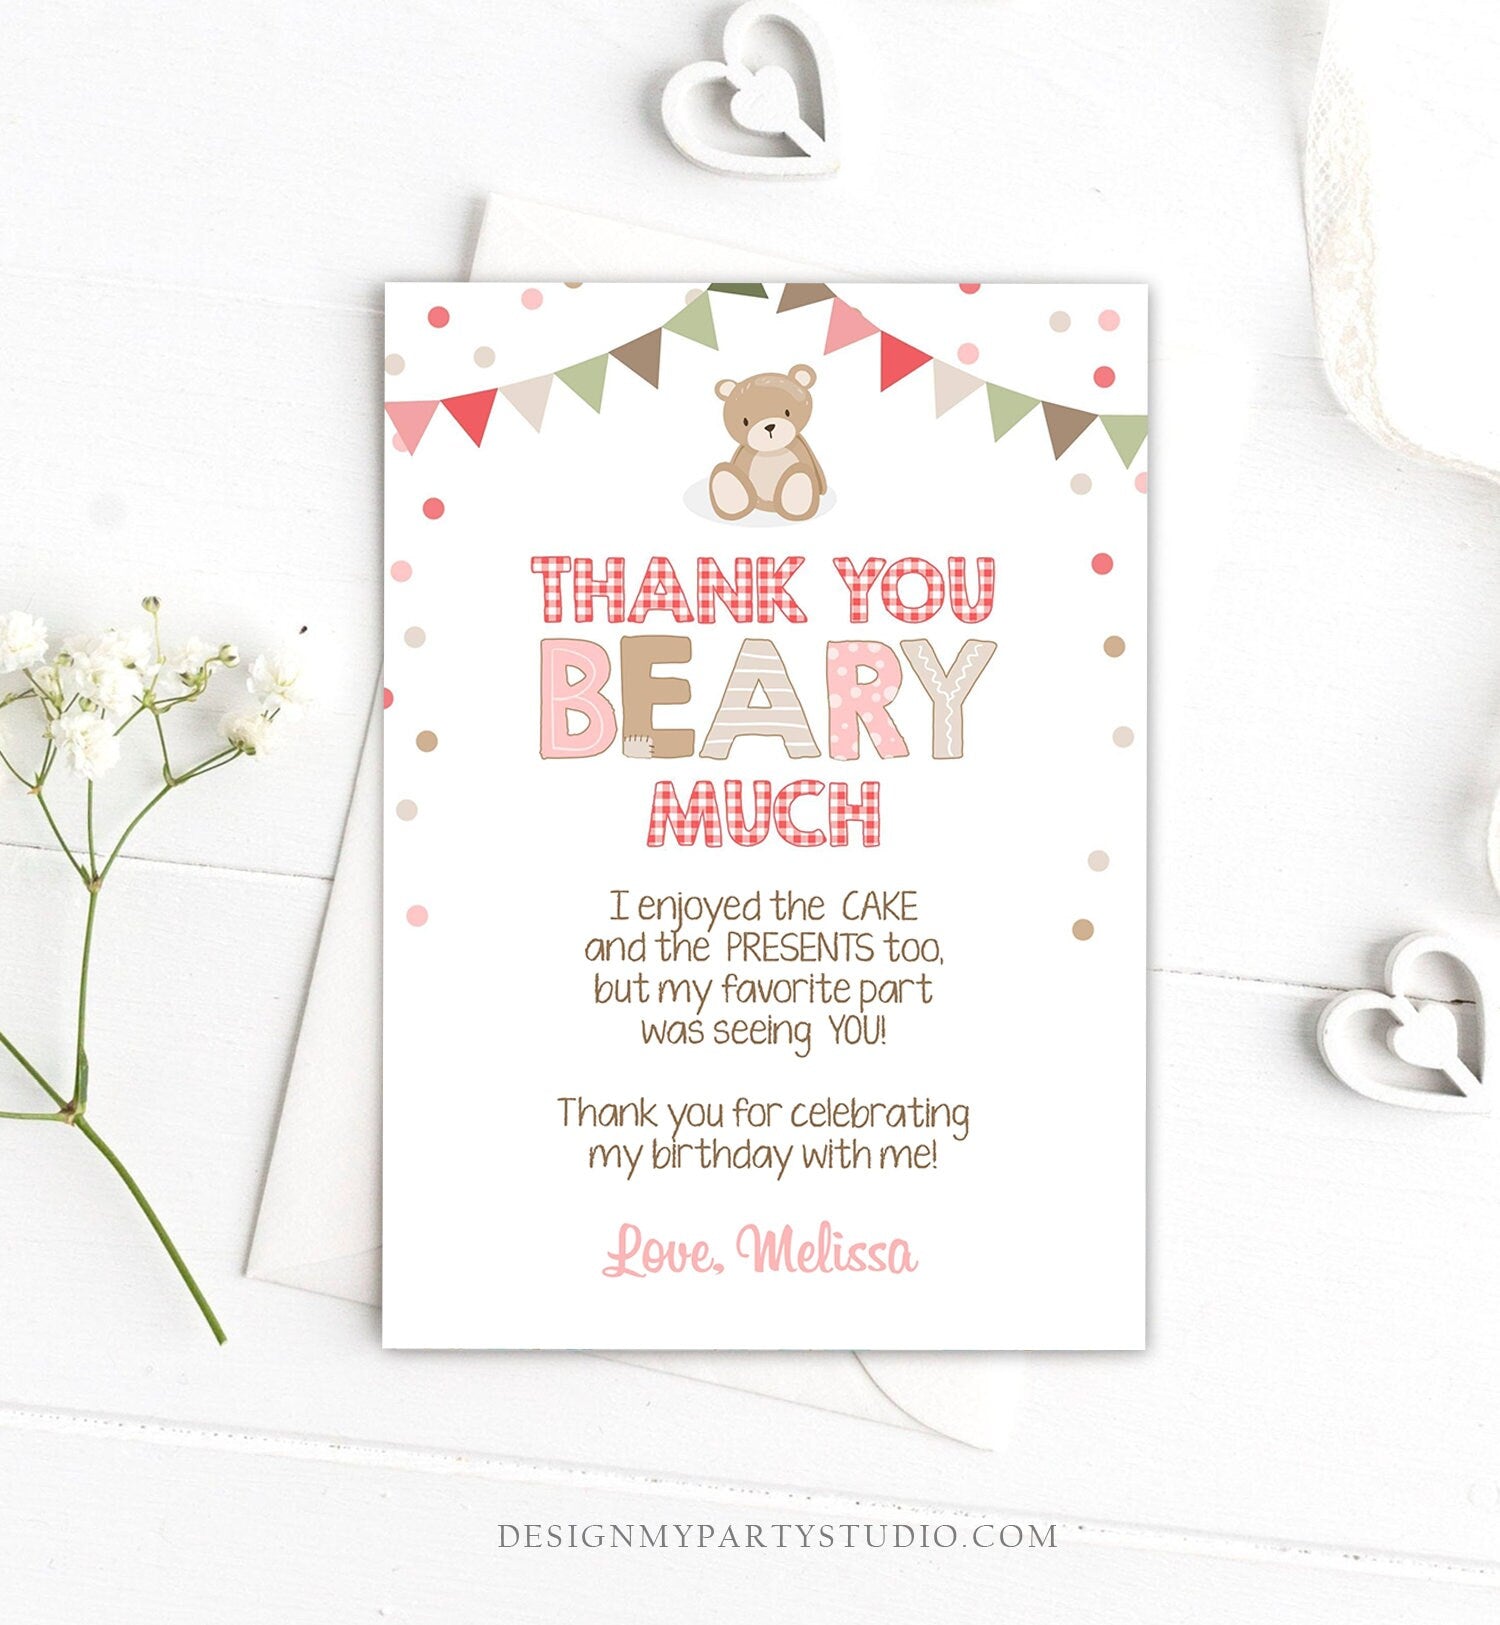 Editable Thank You Card Teddy Bear Birthday Picnic Beary Much Girl Pink Woodland Download Printable Thank You Template Digital Corjl 0100